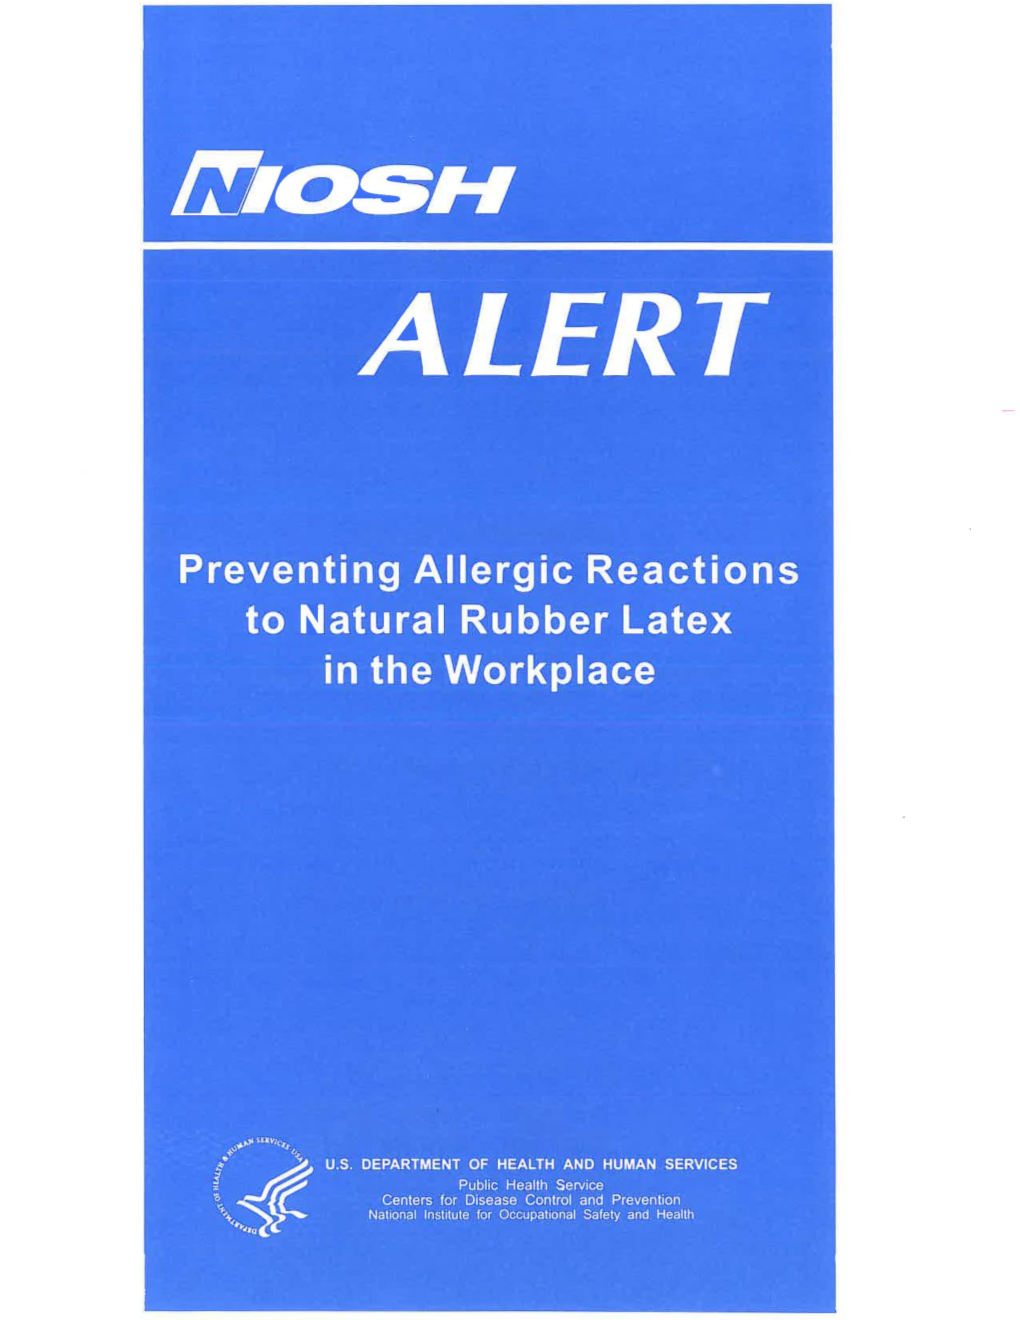 Preventing Allergic Reactions to Natural Rubber Latex in the Workplace